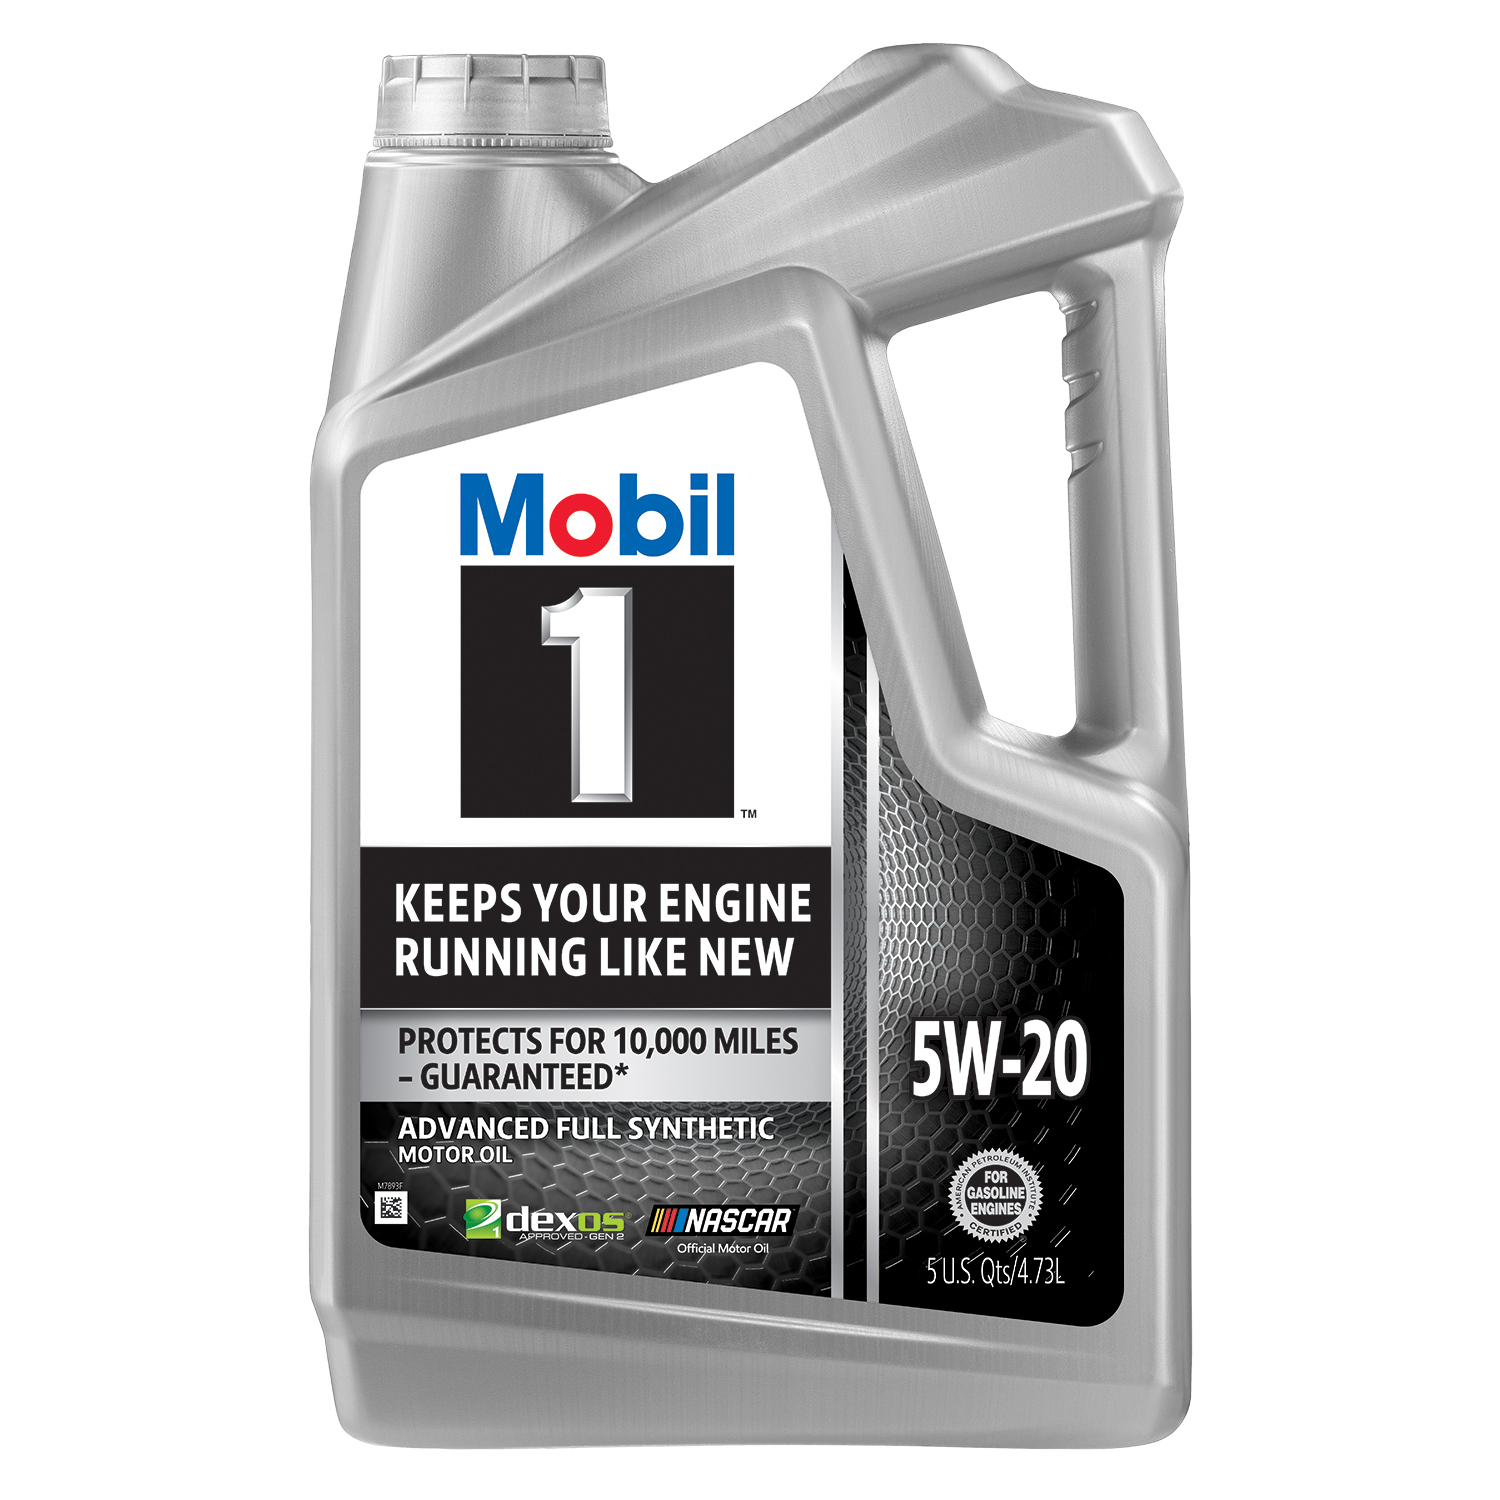 5qt-mobil-1-full-synthetic-motor-oil-from-10-66-after-12-rebate-at